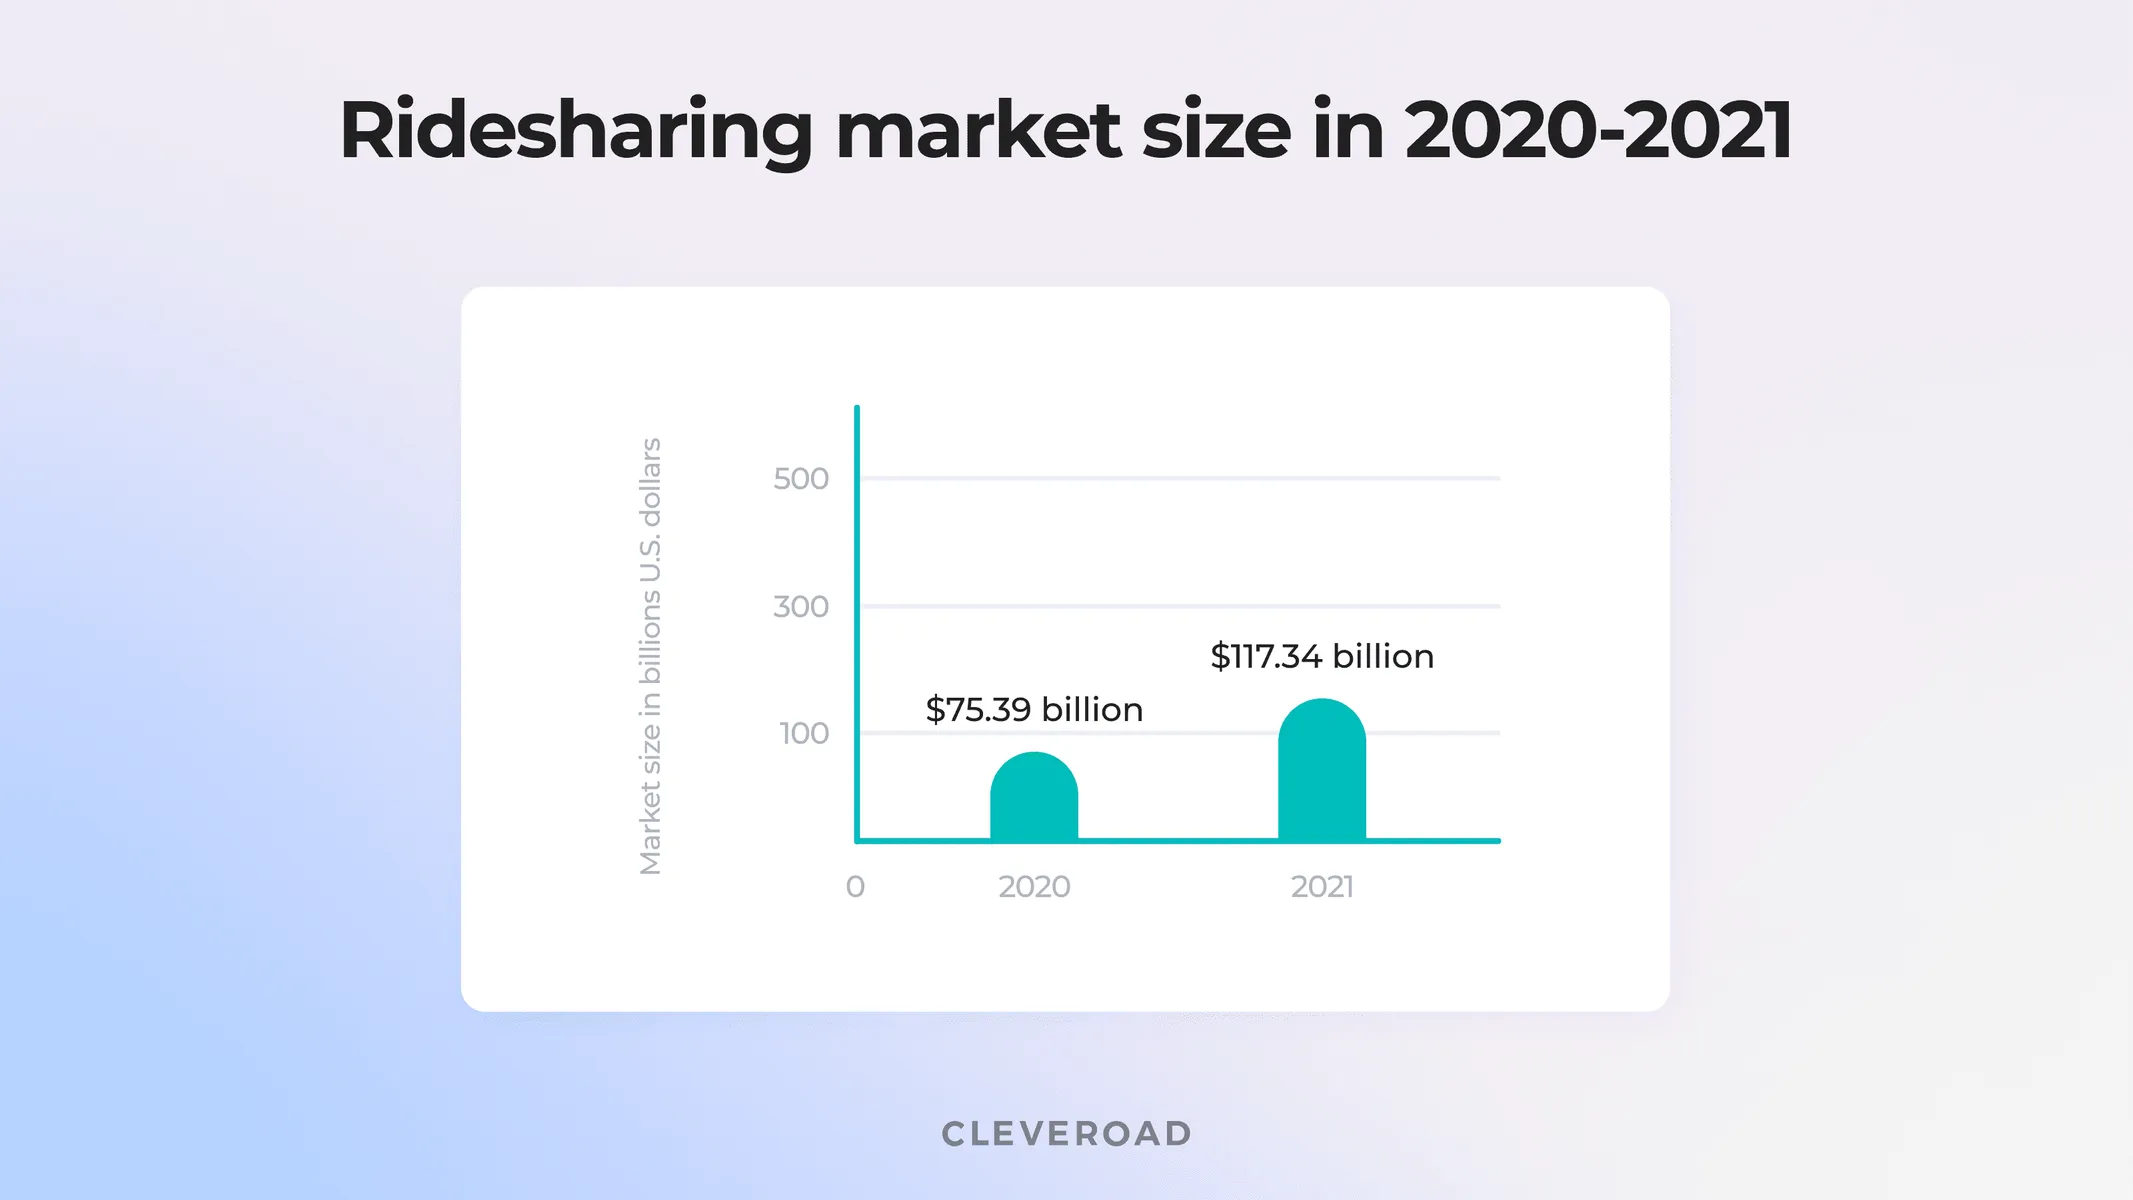 The size of ridesharing market in 2020-2021